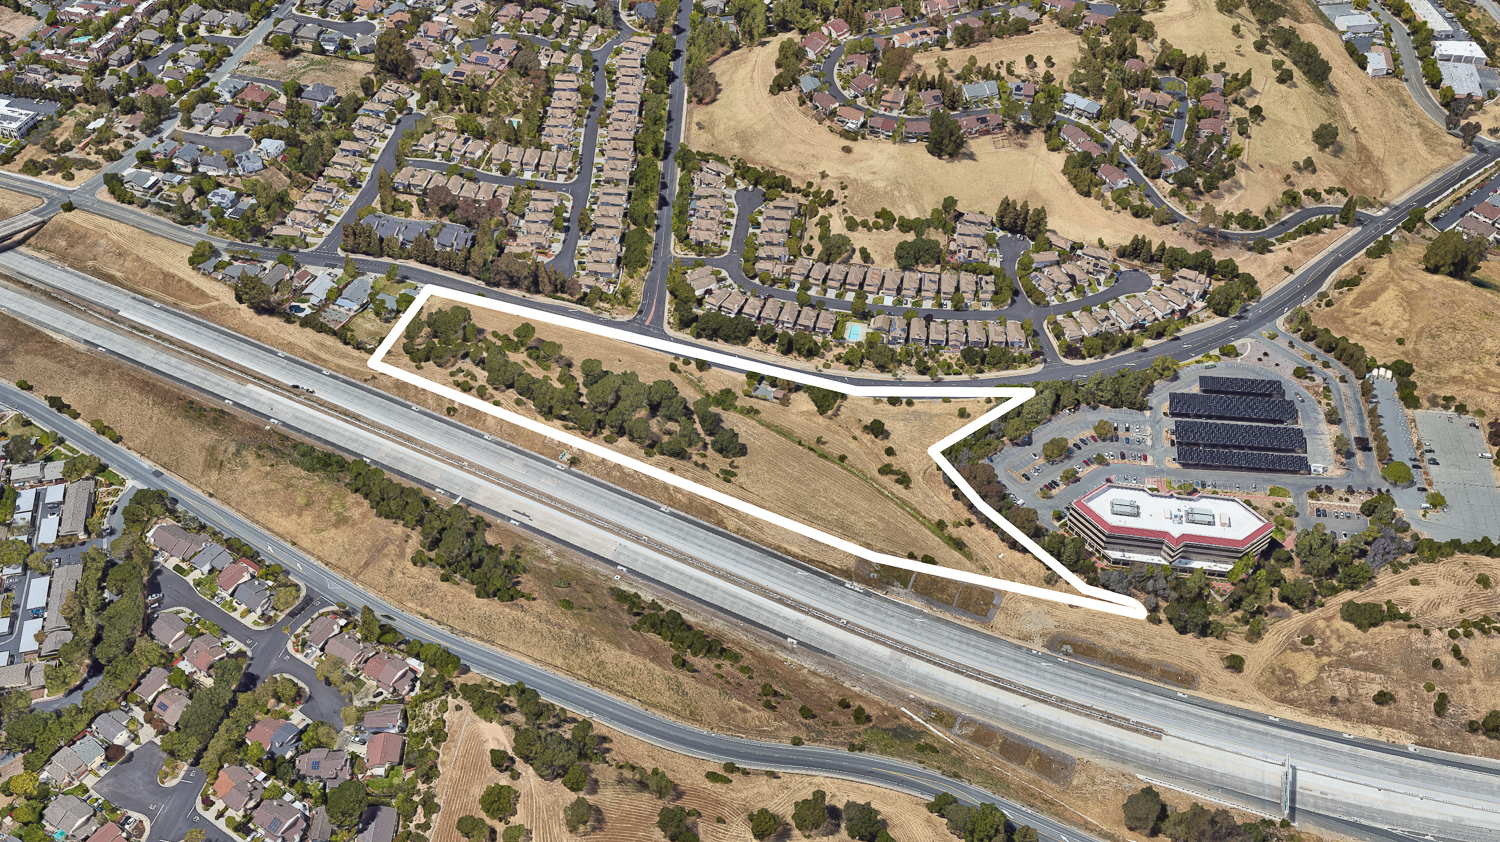 Amáre Apartments site roughly outlined by YIMBY, image via Google Satellite